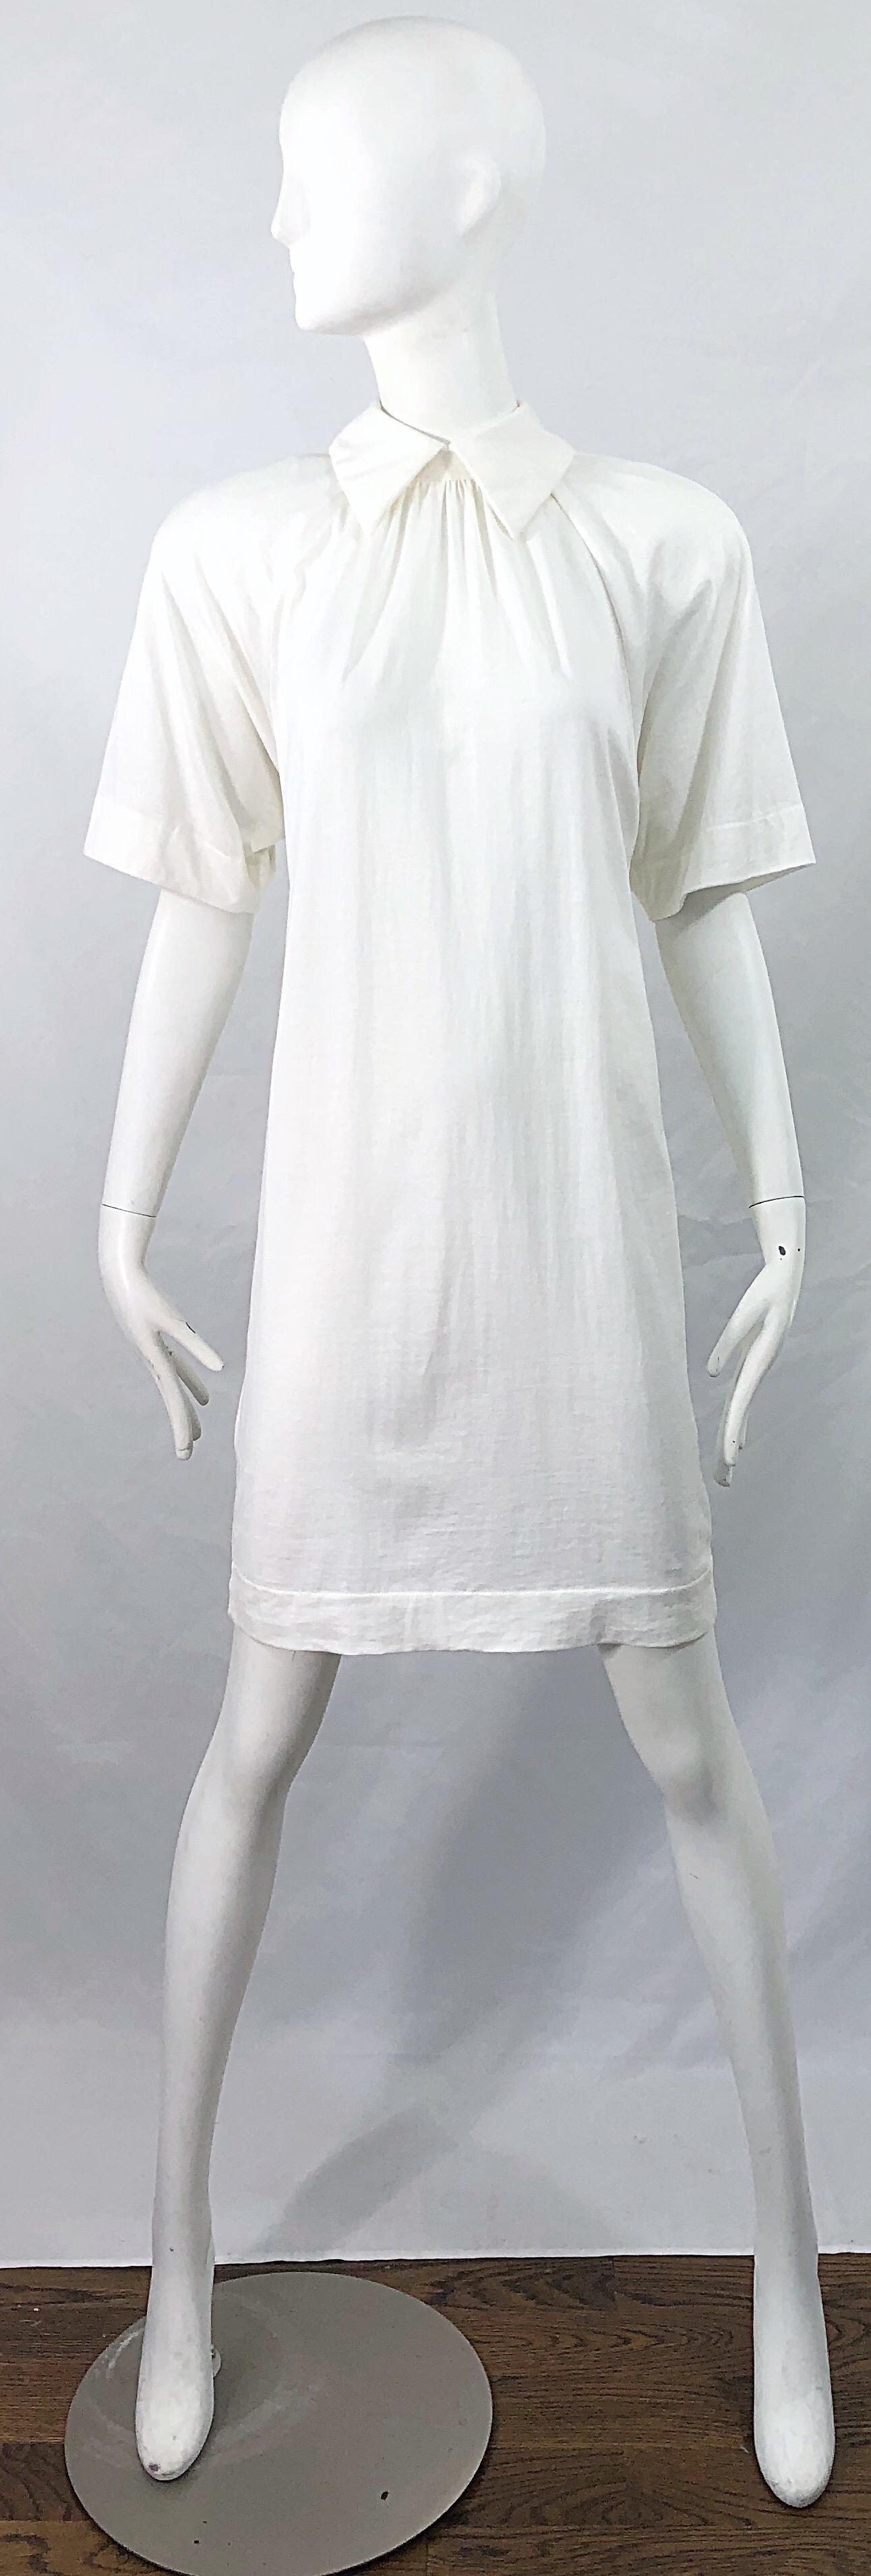 Avant Garde early 90s JAMES PURCELL Couture stark white cotton tee shirt dress ! Purcell left his lucrative marketing job on Wall Street  on May 11, 1989 to pursue his dream of becoming a designer. He was almost immediately successful, and was known